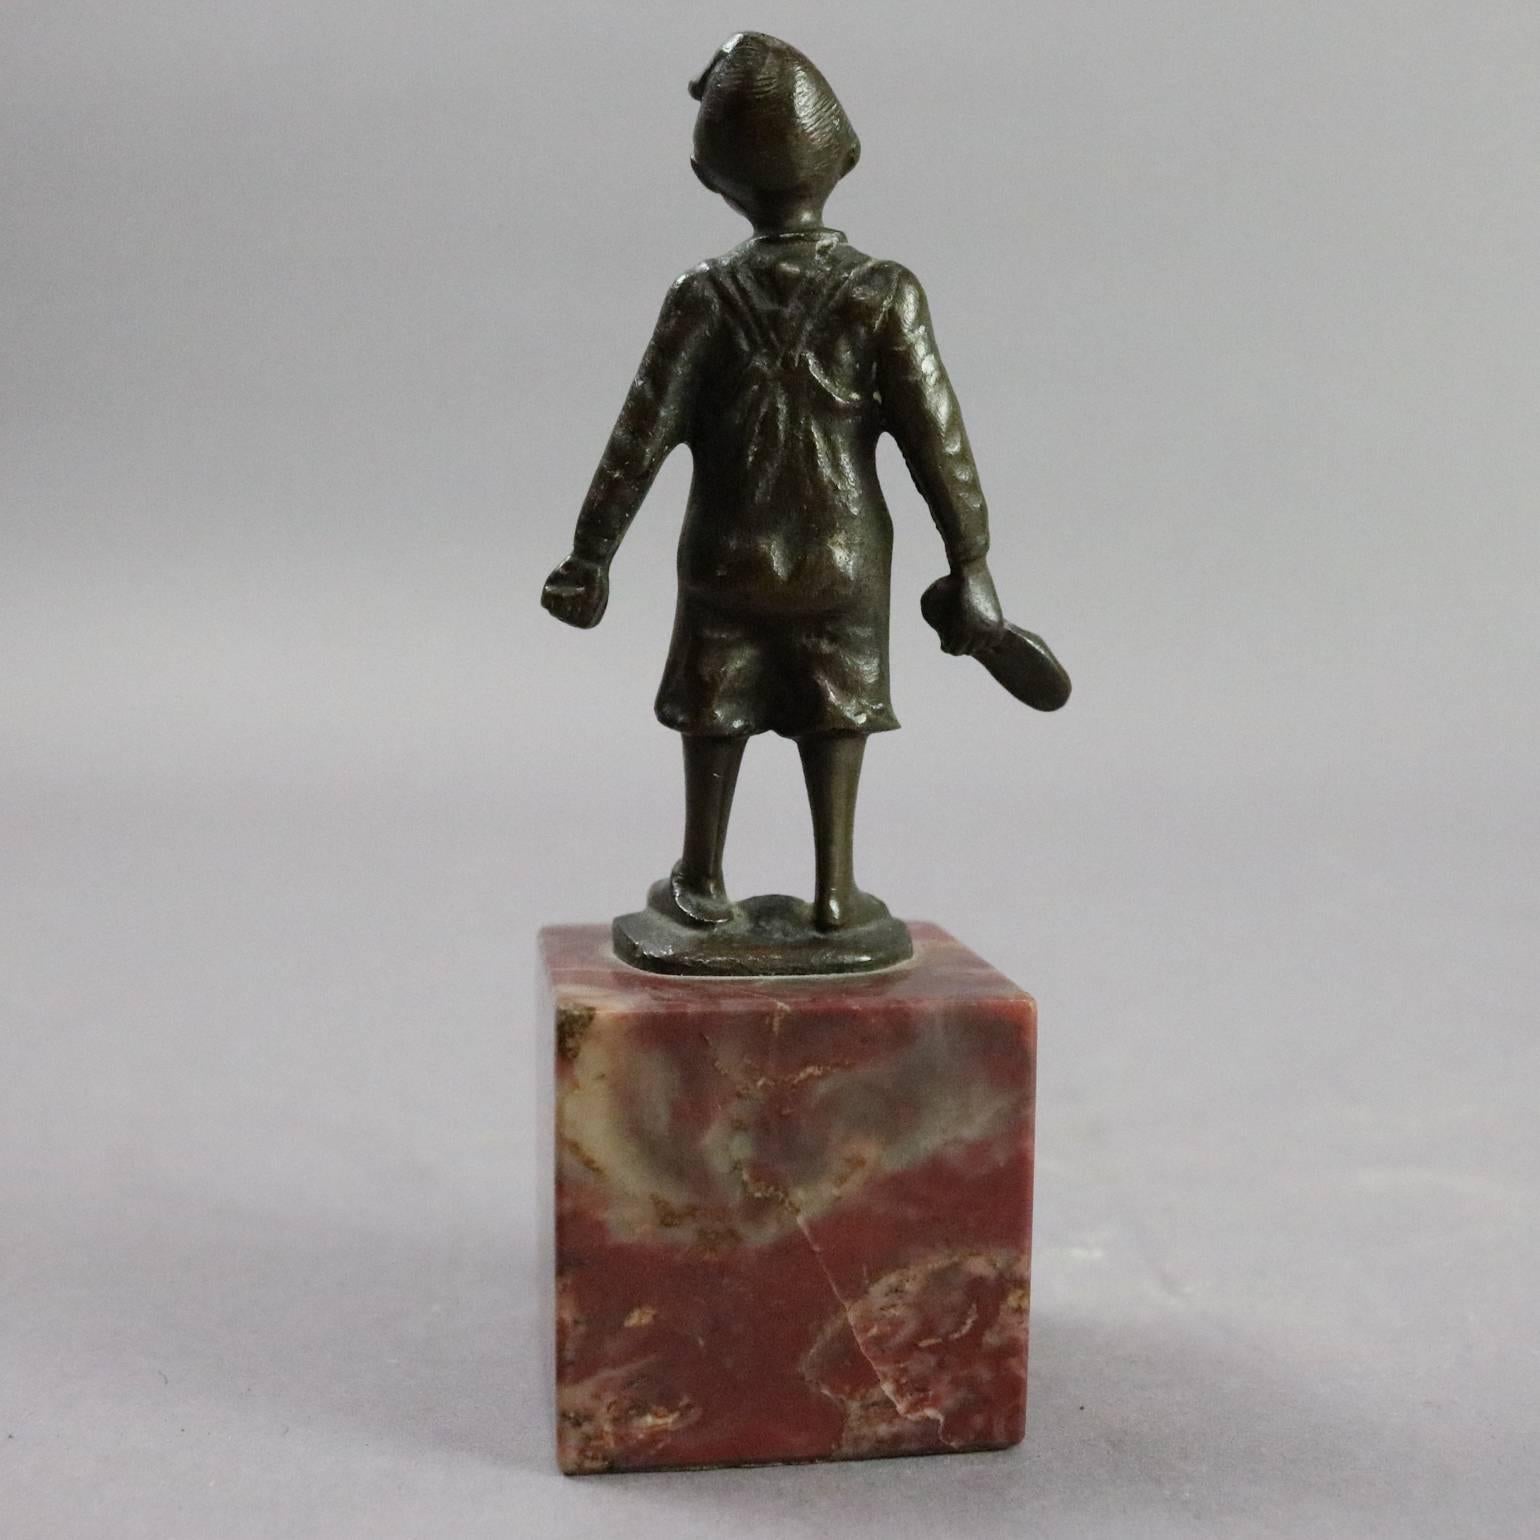 European Antique Figural Cast Bronze Sculpture of Young Boy with Shoe on Marble Base